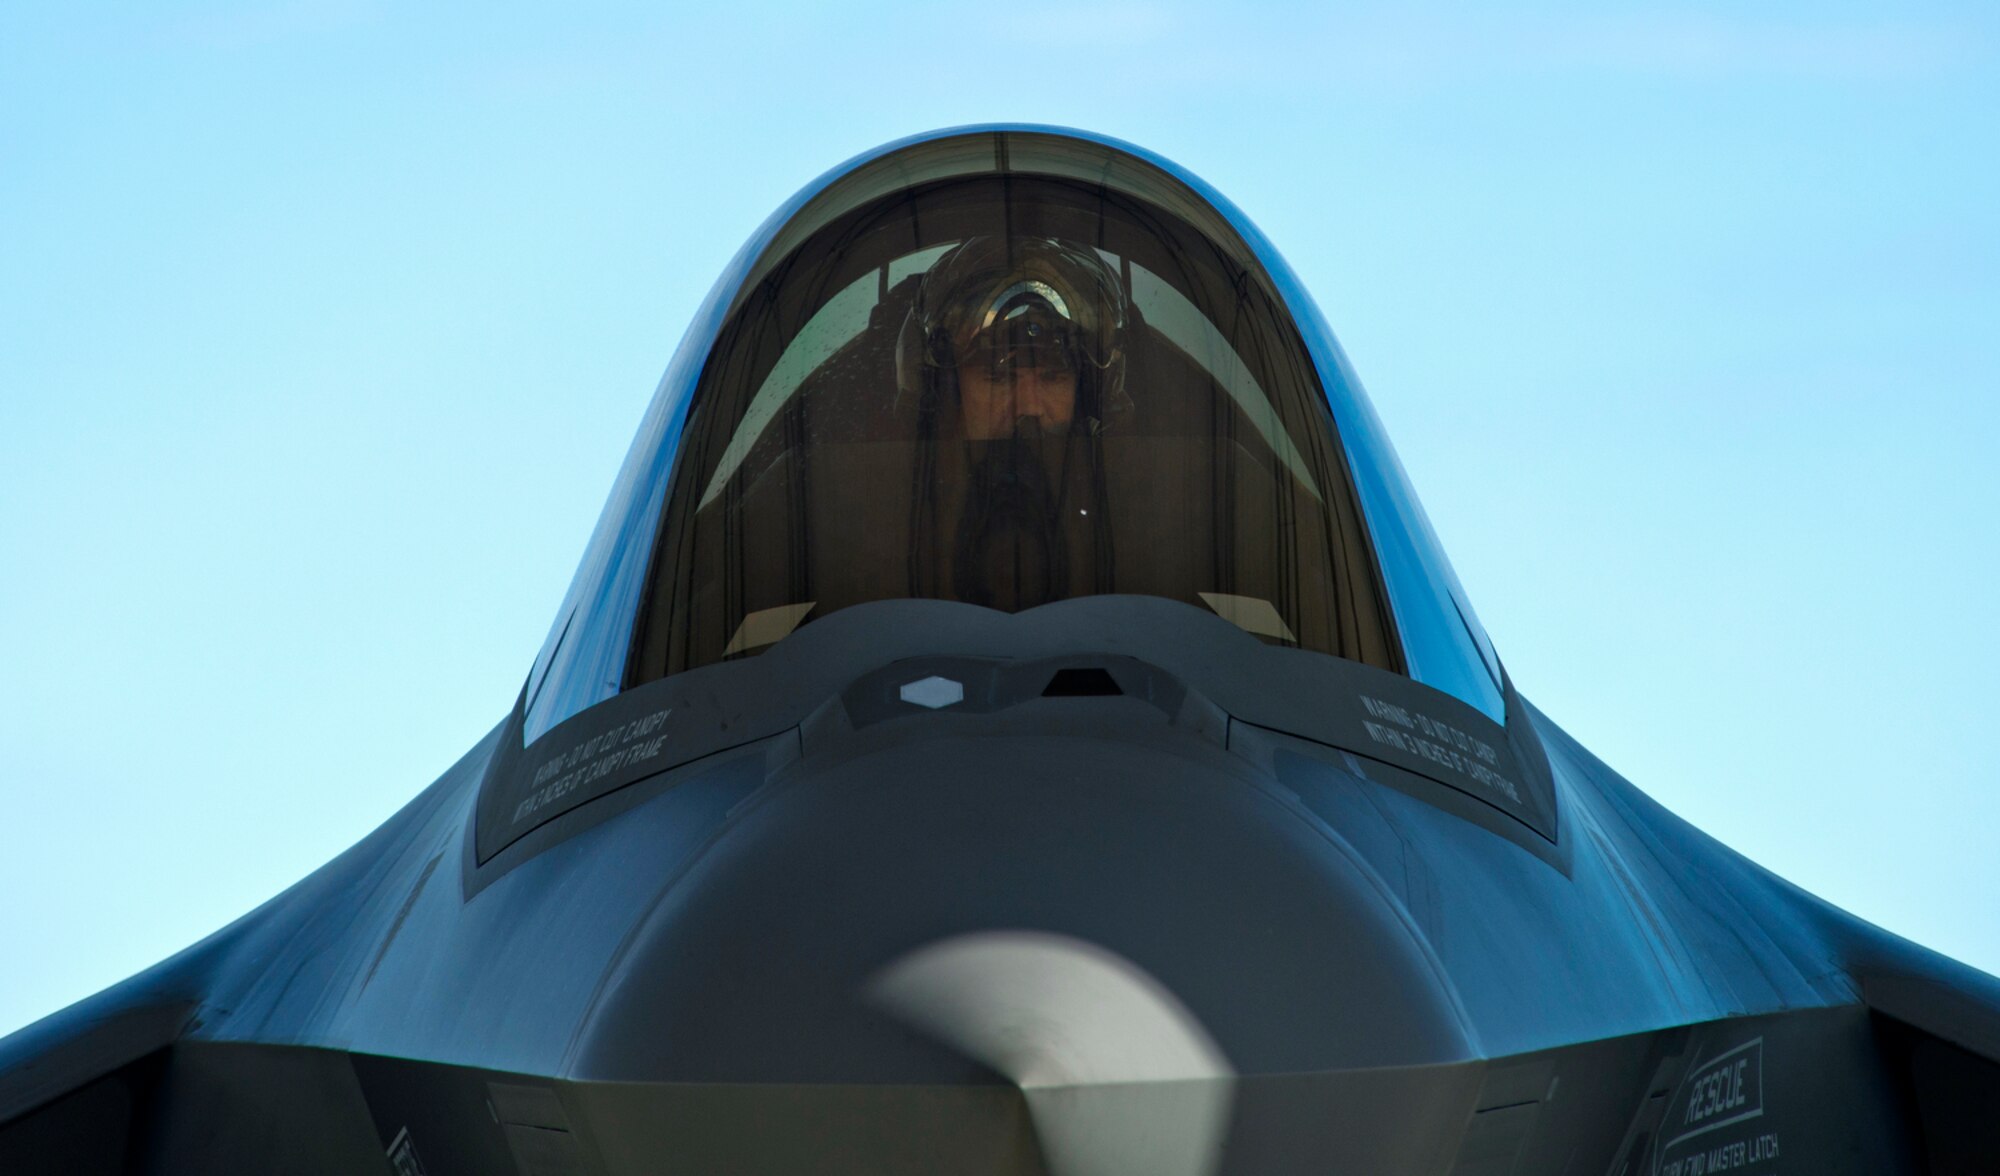 A 33d Fighter Wing pilot prepares his F-35A Lightning II for a training sortie during preflight checks on the aircraft. The 33d Fighter Wing, is the only joint graduate flying and maintenance training wing for the F-35 for the U.S. Air Force. (U.S. Air Force photo/Tech. Sgt. Bennie J. Davis III)